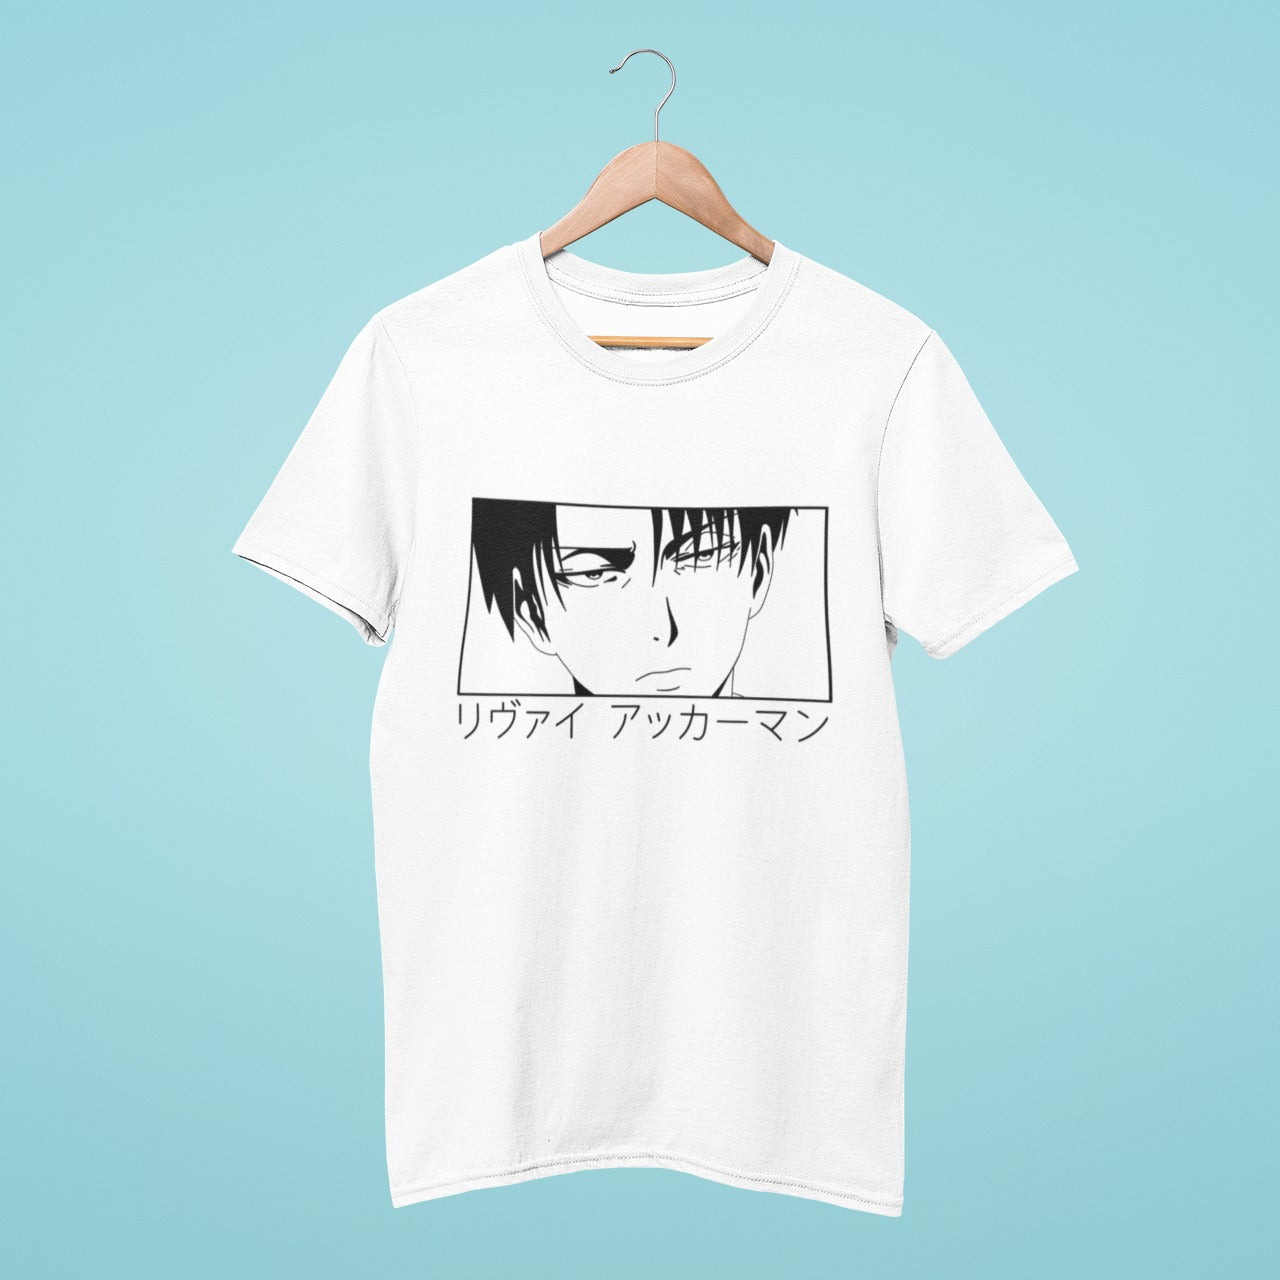 Get ready to showcase your love for Attack on Titan with our sleek white t-shirt featuring a powerful black and white image of Levi Ackerman's serious and determined face, with his name in Japanese characters below. Made with high-quality materials, this shirt offers both comfort and style. Perfect for anime conventions and casual outings, get yours today and add some edge to your wardrobe!